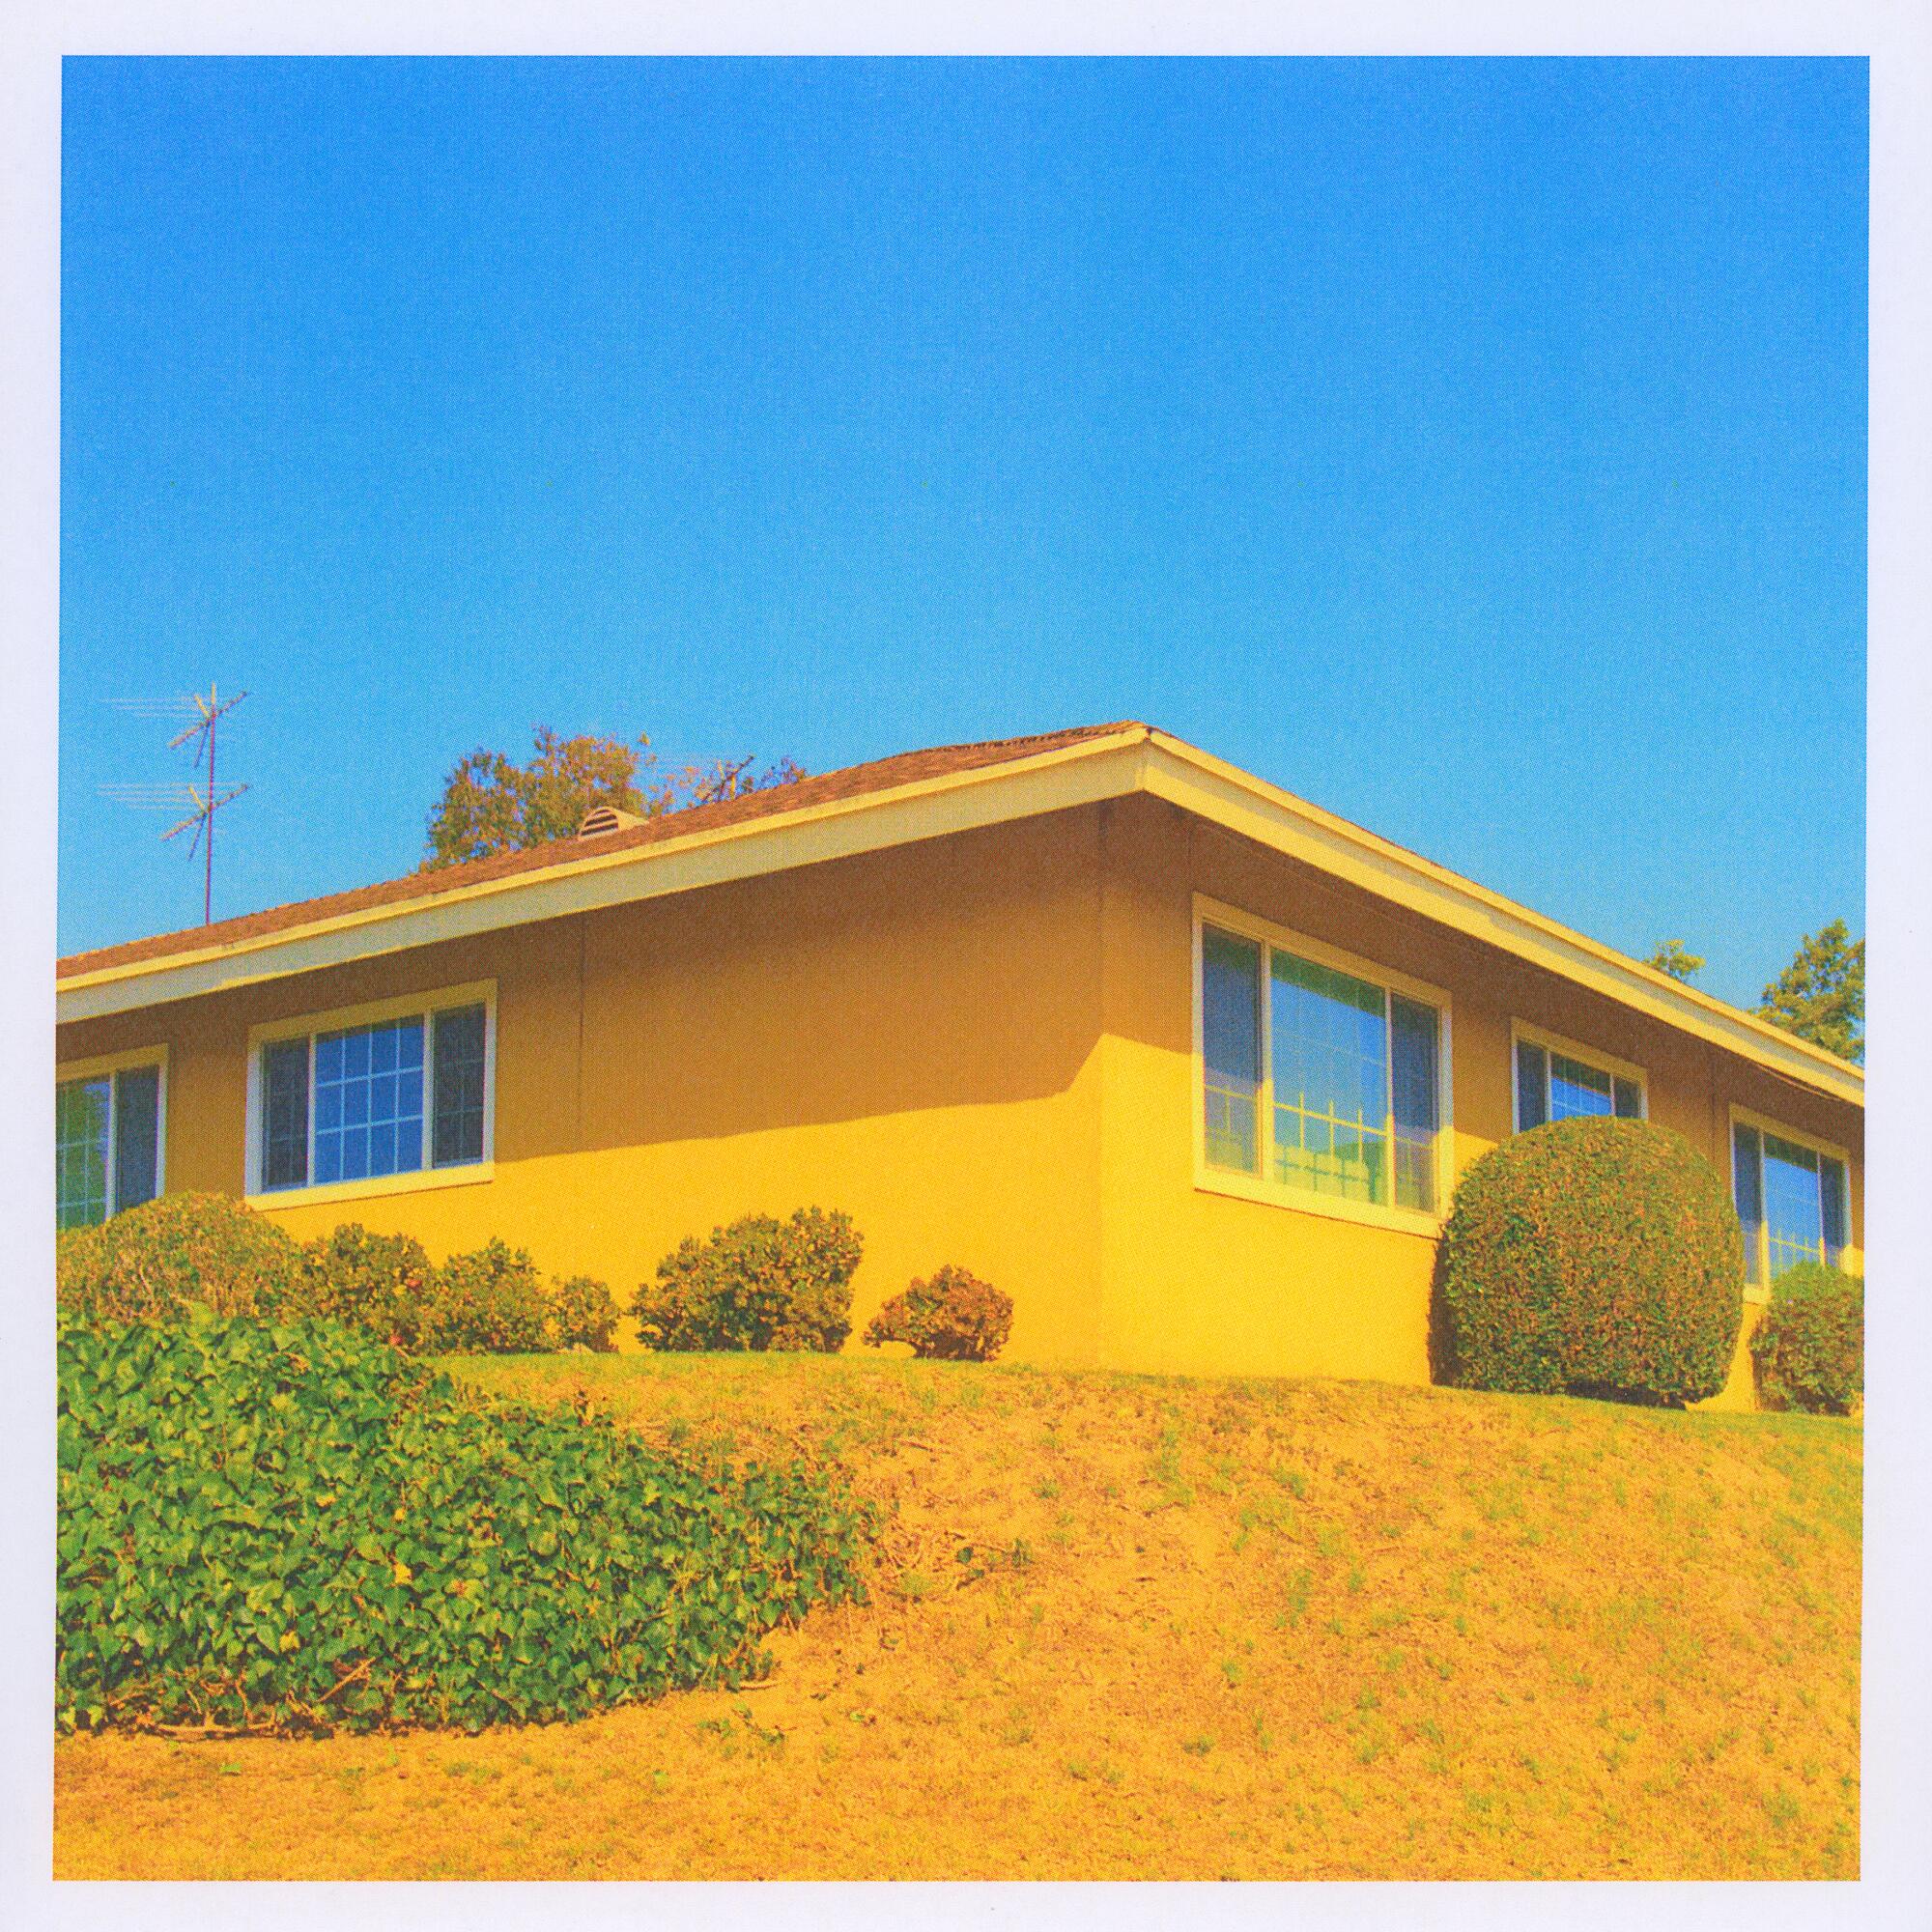 A photo of a yellow house against a blue sky.